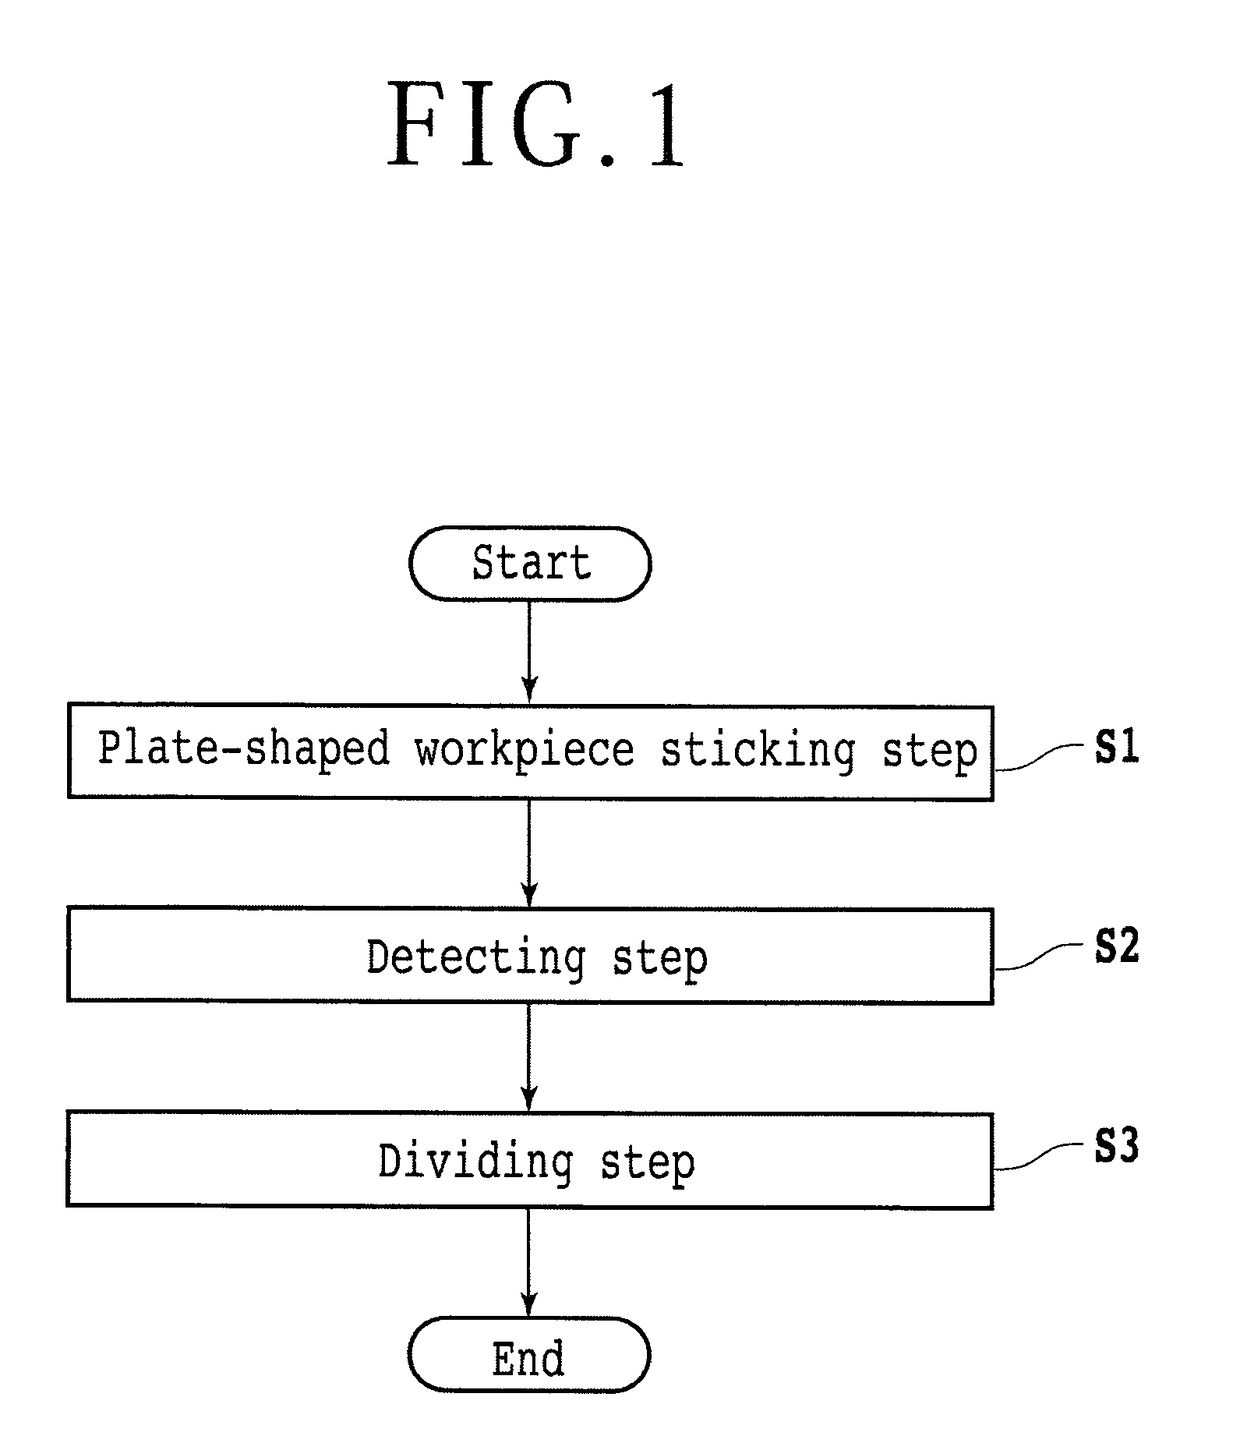 Method of dividing plate-shaped workpieces